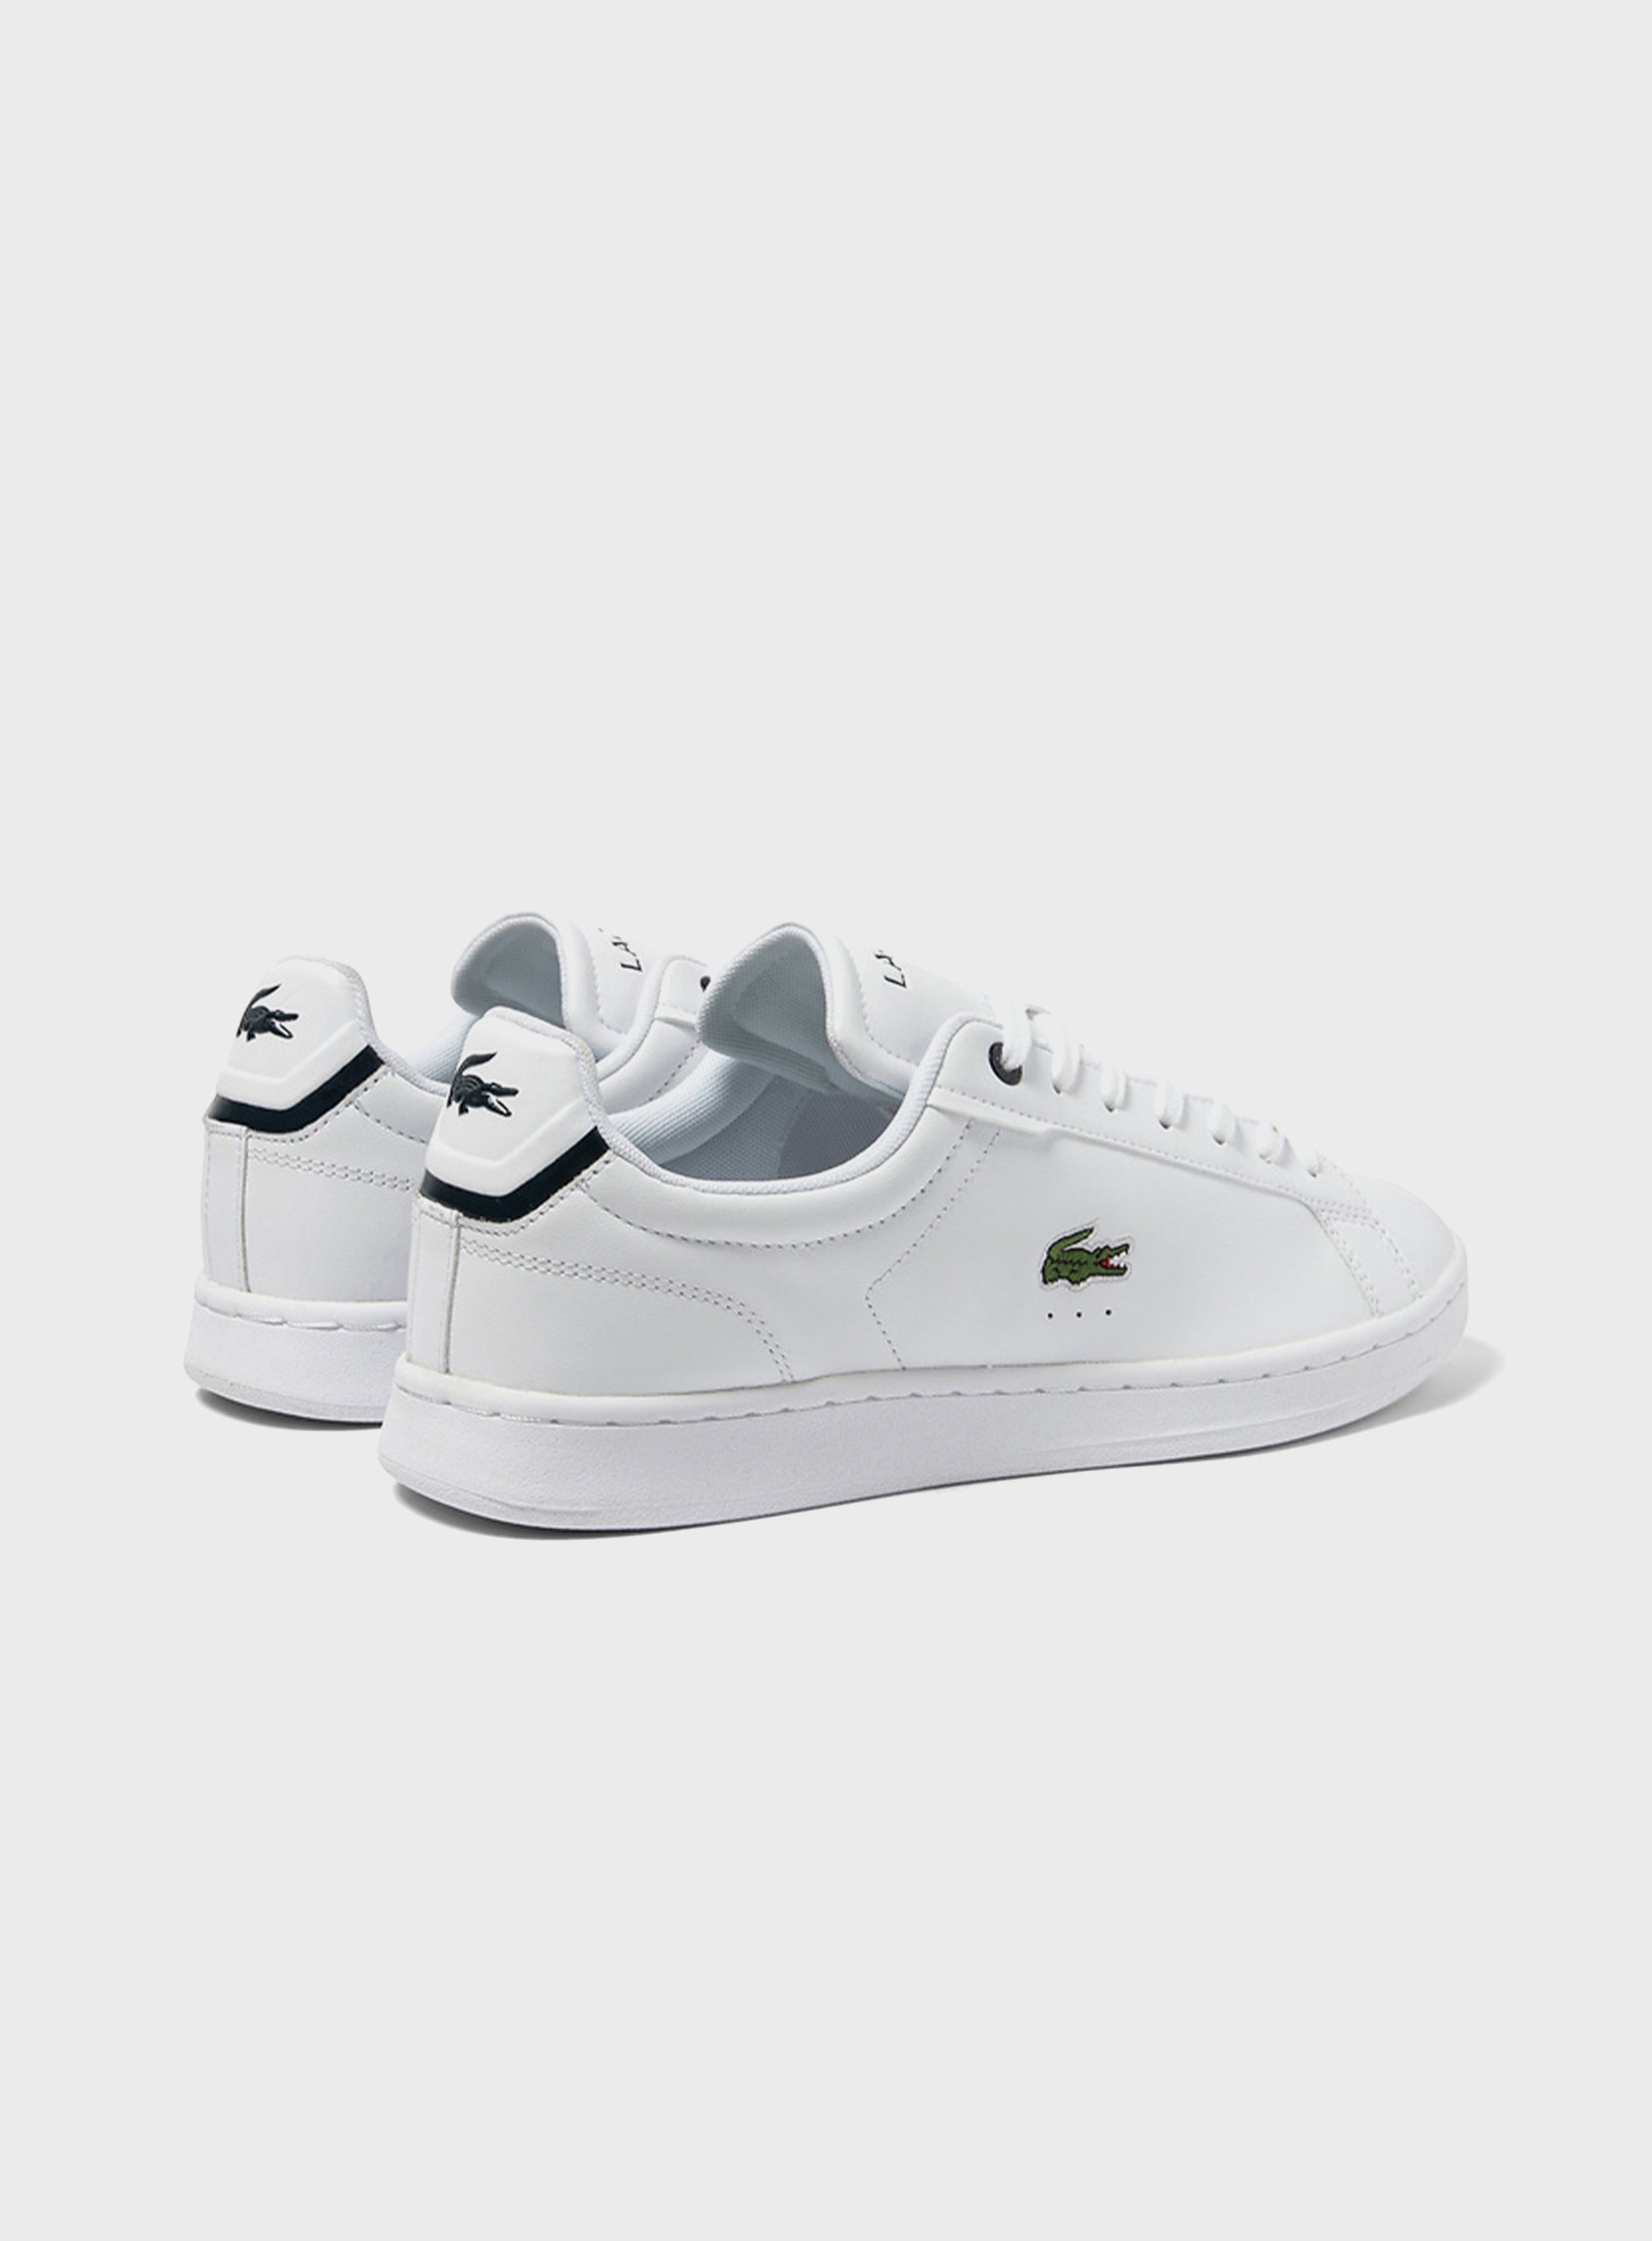 Buy Lacoste White Leather Sneakers for Men Online @ Tata CLiQ